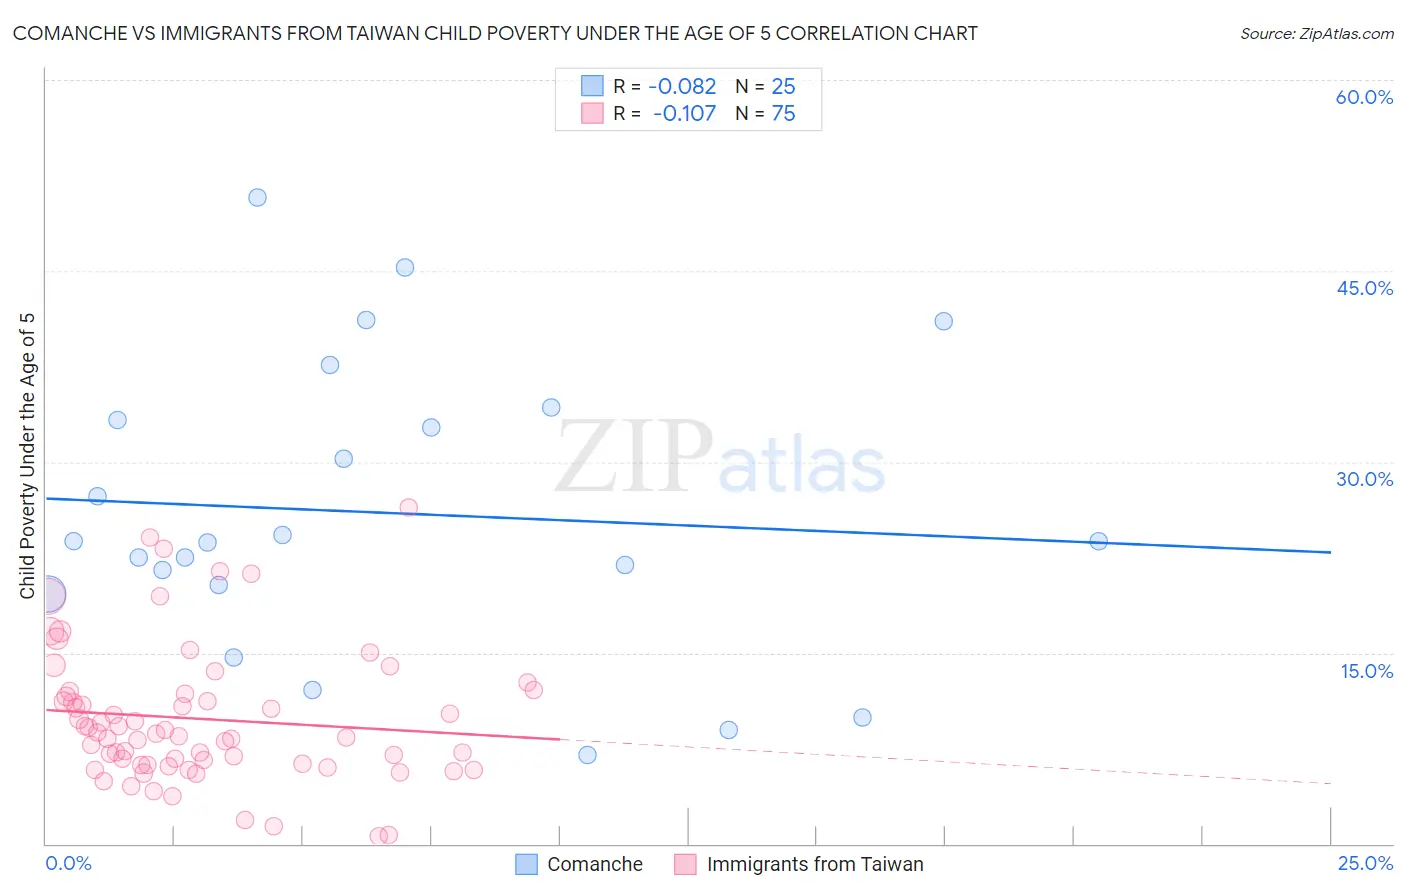 Comanche vs Immigrants from Taiwan Child Poverty Under the Age of 5